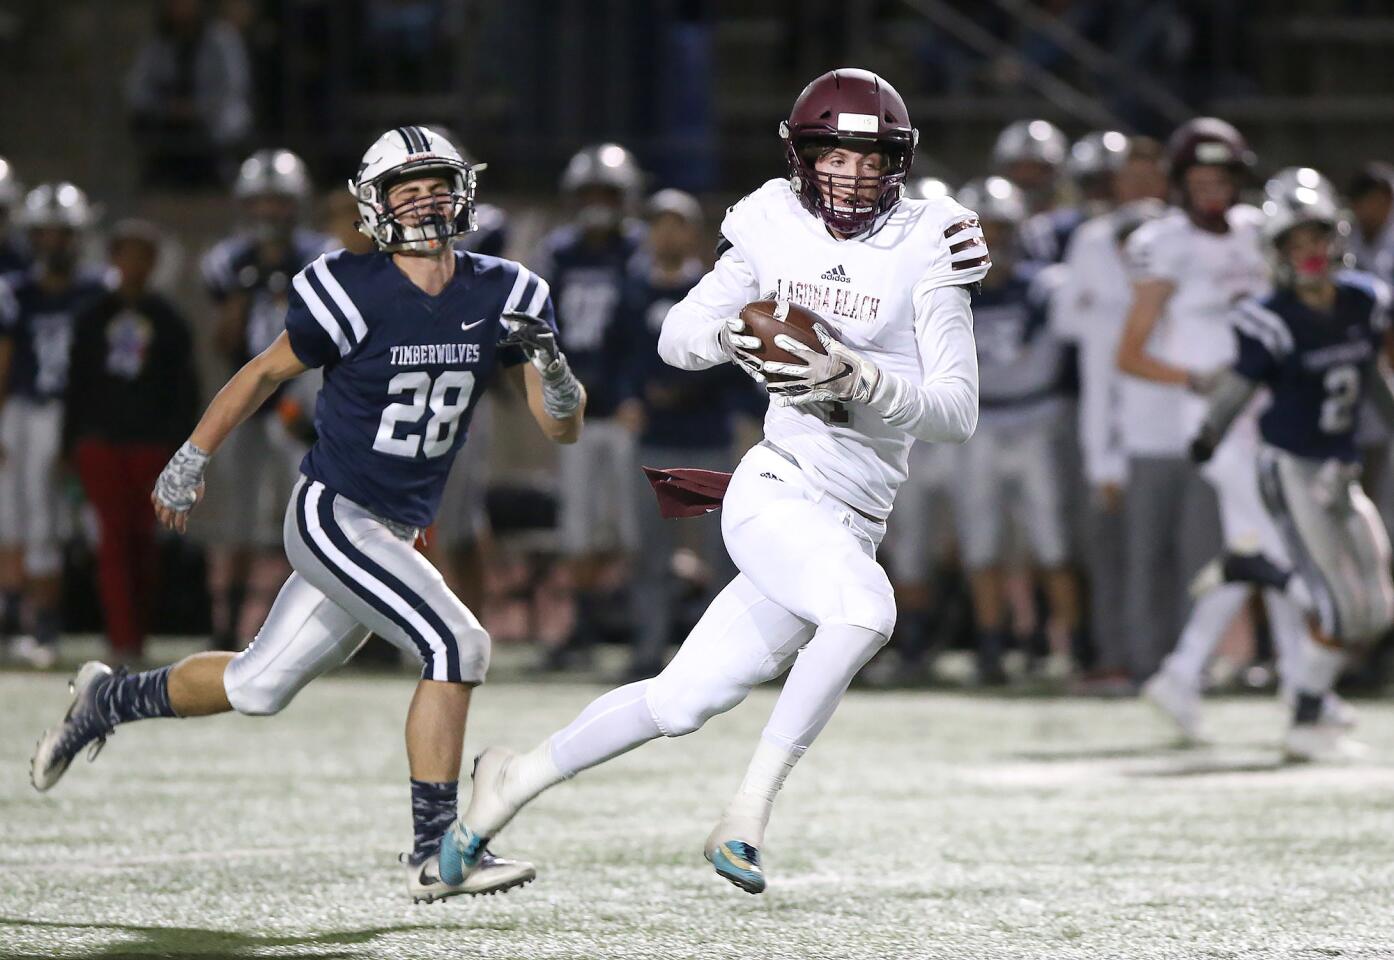 Sean Nolan pulls in a pass on the run and takes it to the end zone in Laguna Beach High's CIF Southern Section Division 12 quarterfinal playoff game against Northwood at Irvine High on Friday.